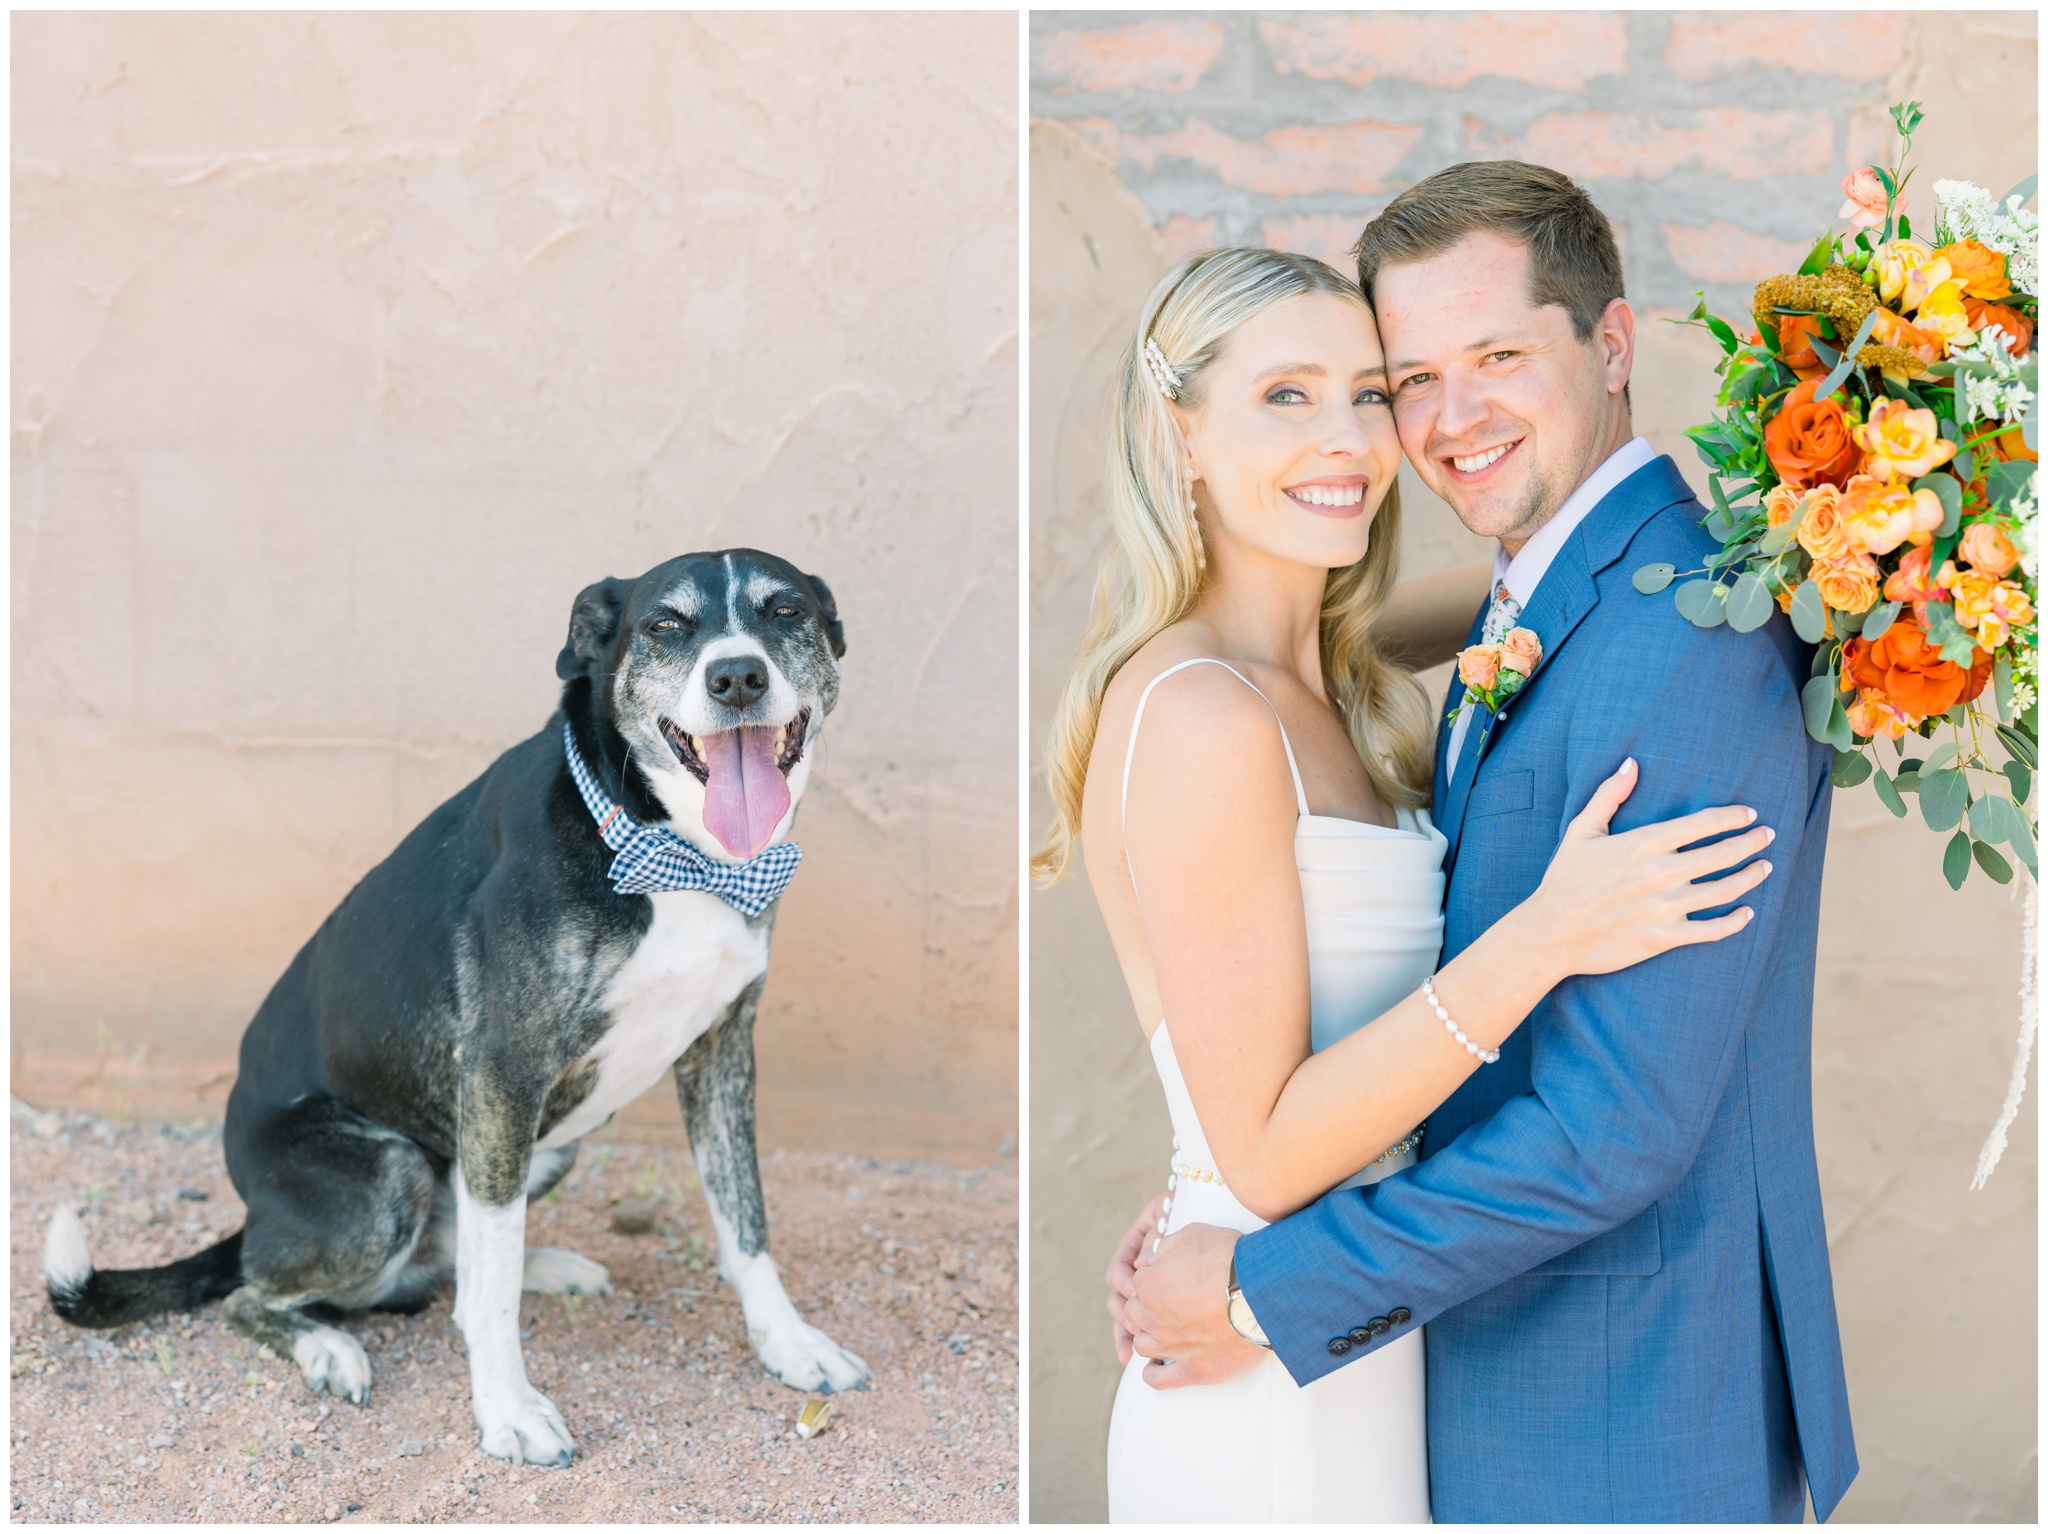 Bride and groom portraits, with dog in boutonniere